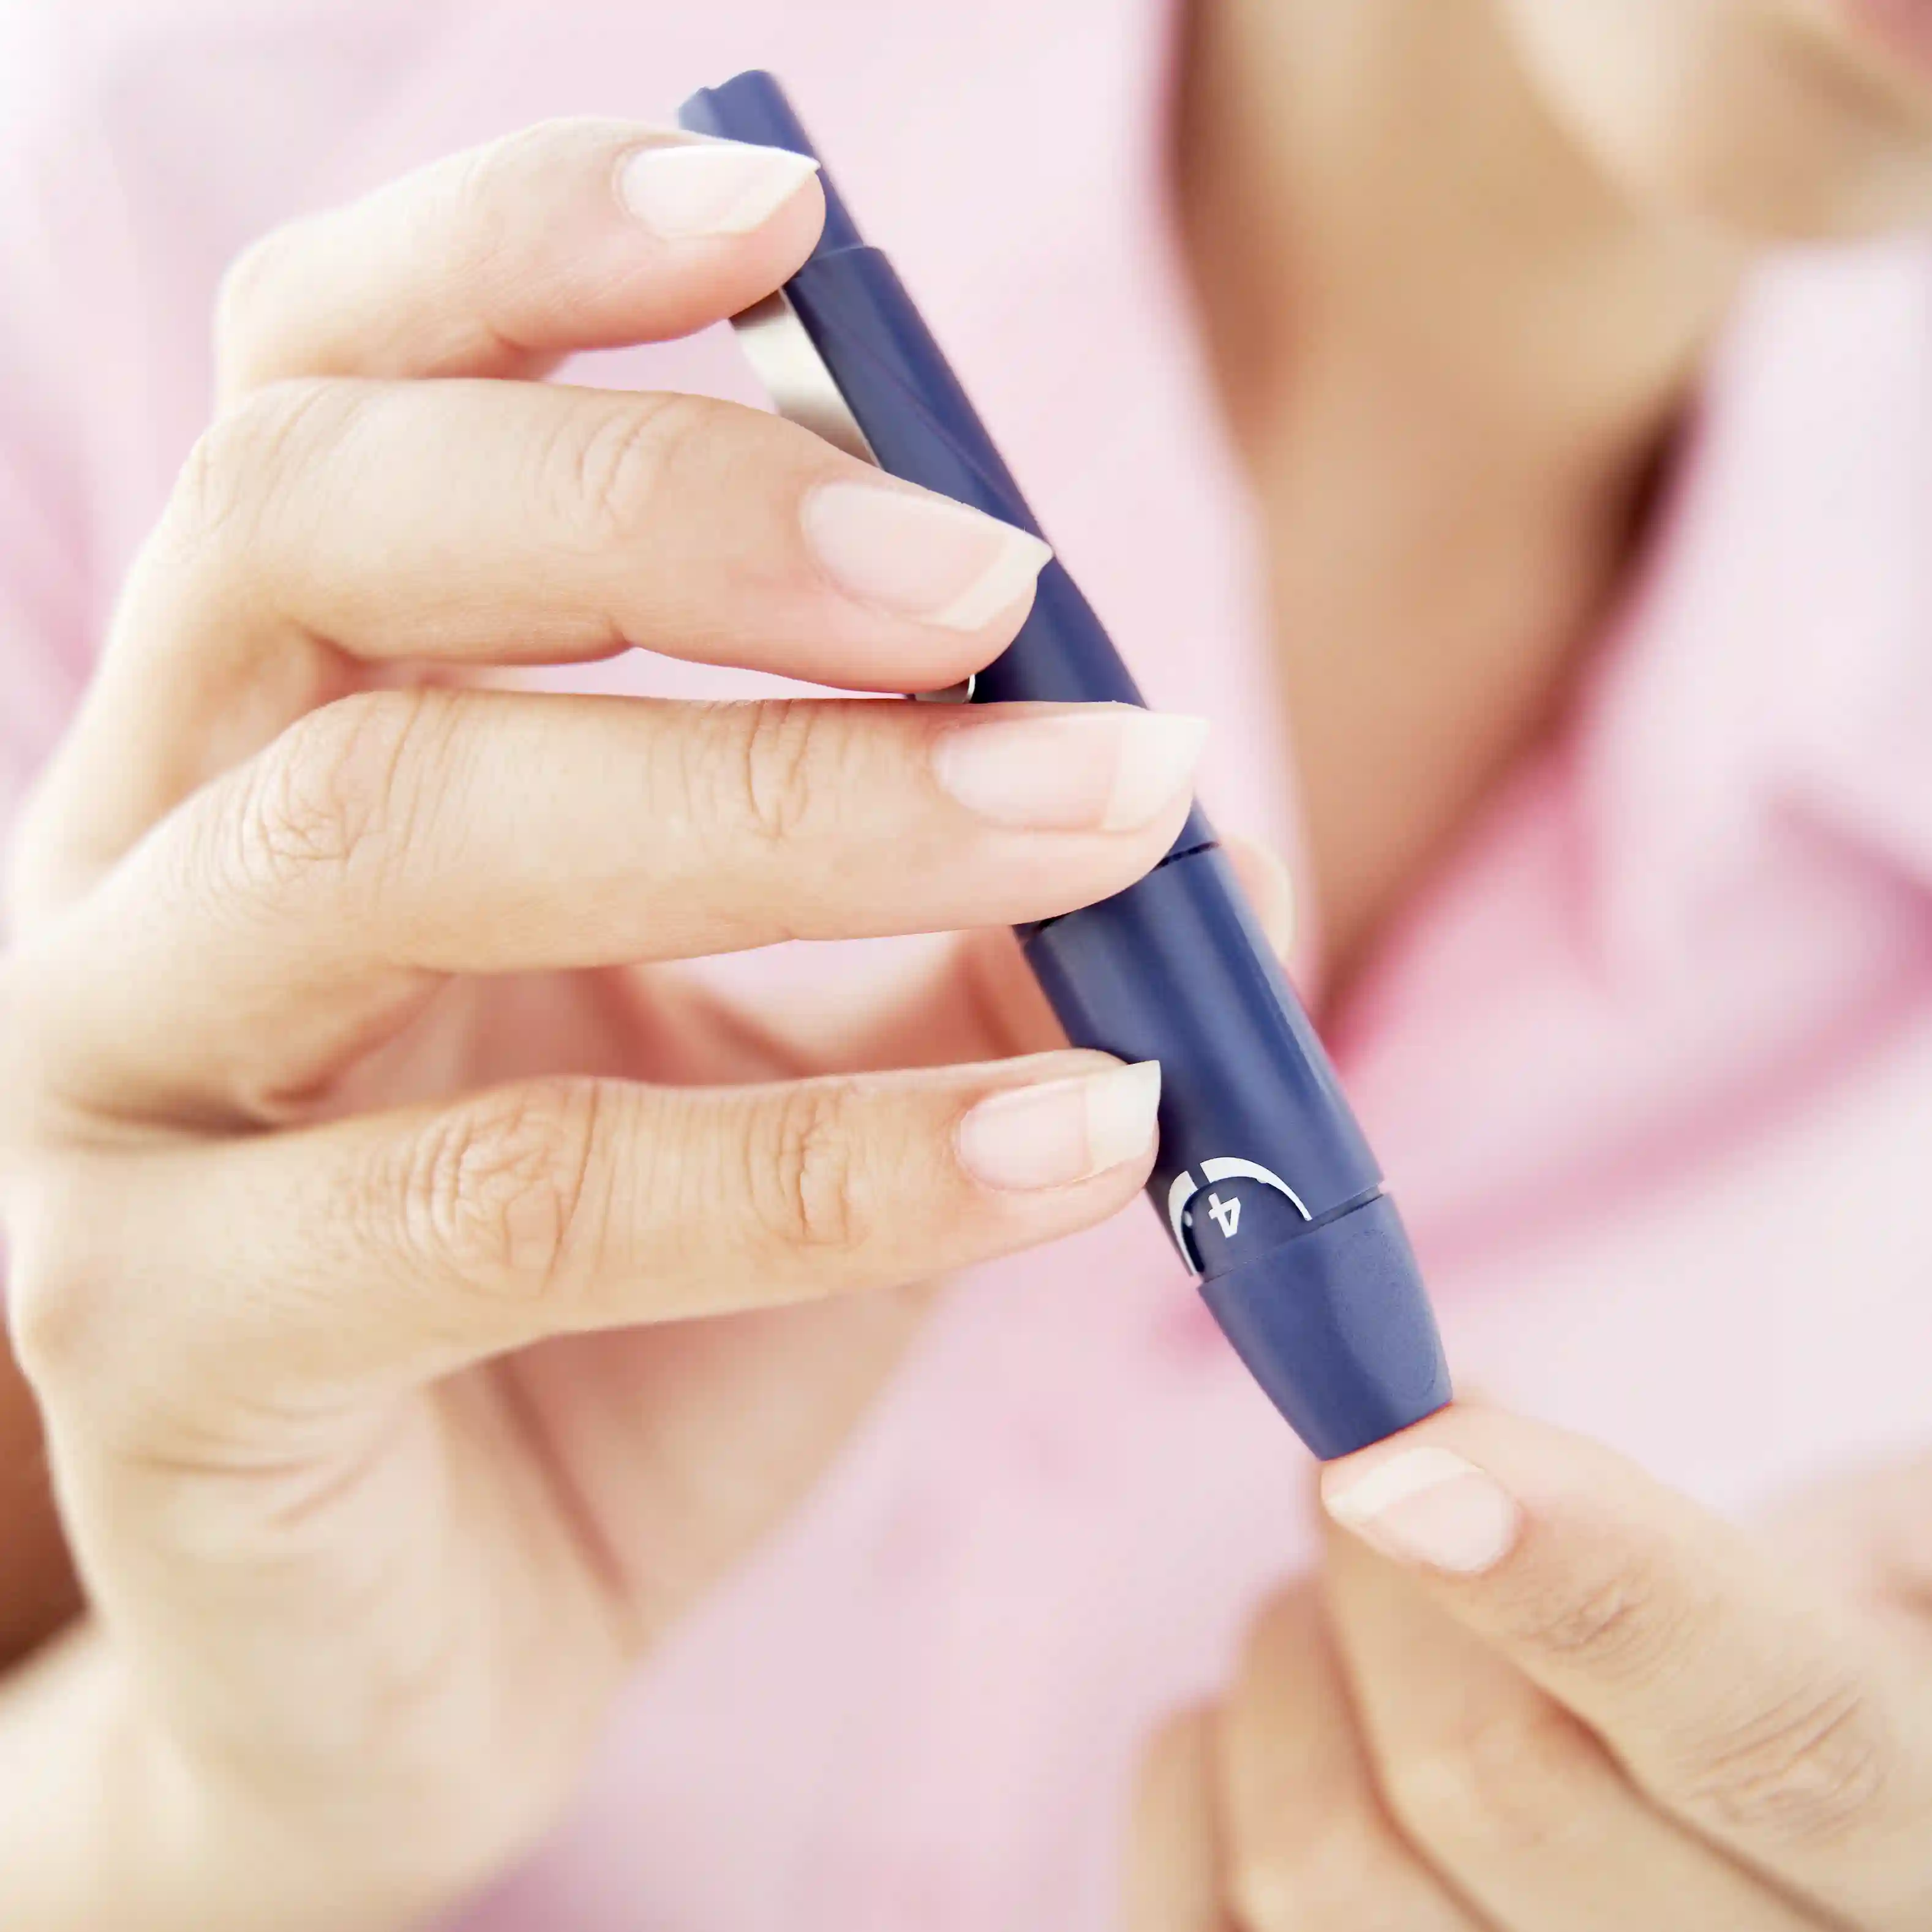 Can Natural Food Supplements Help Control Your Blood Sugar Level?